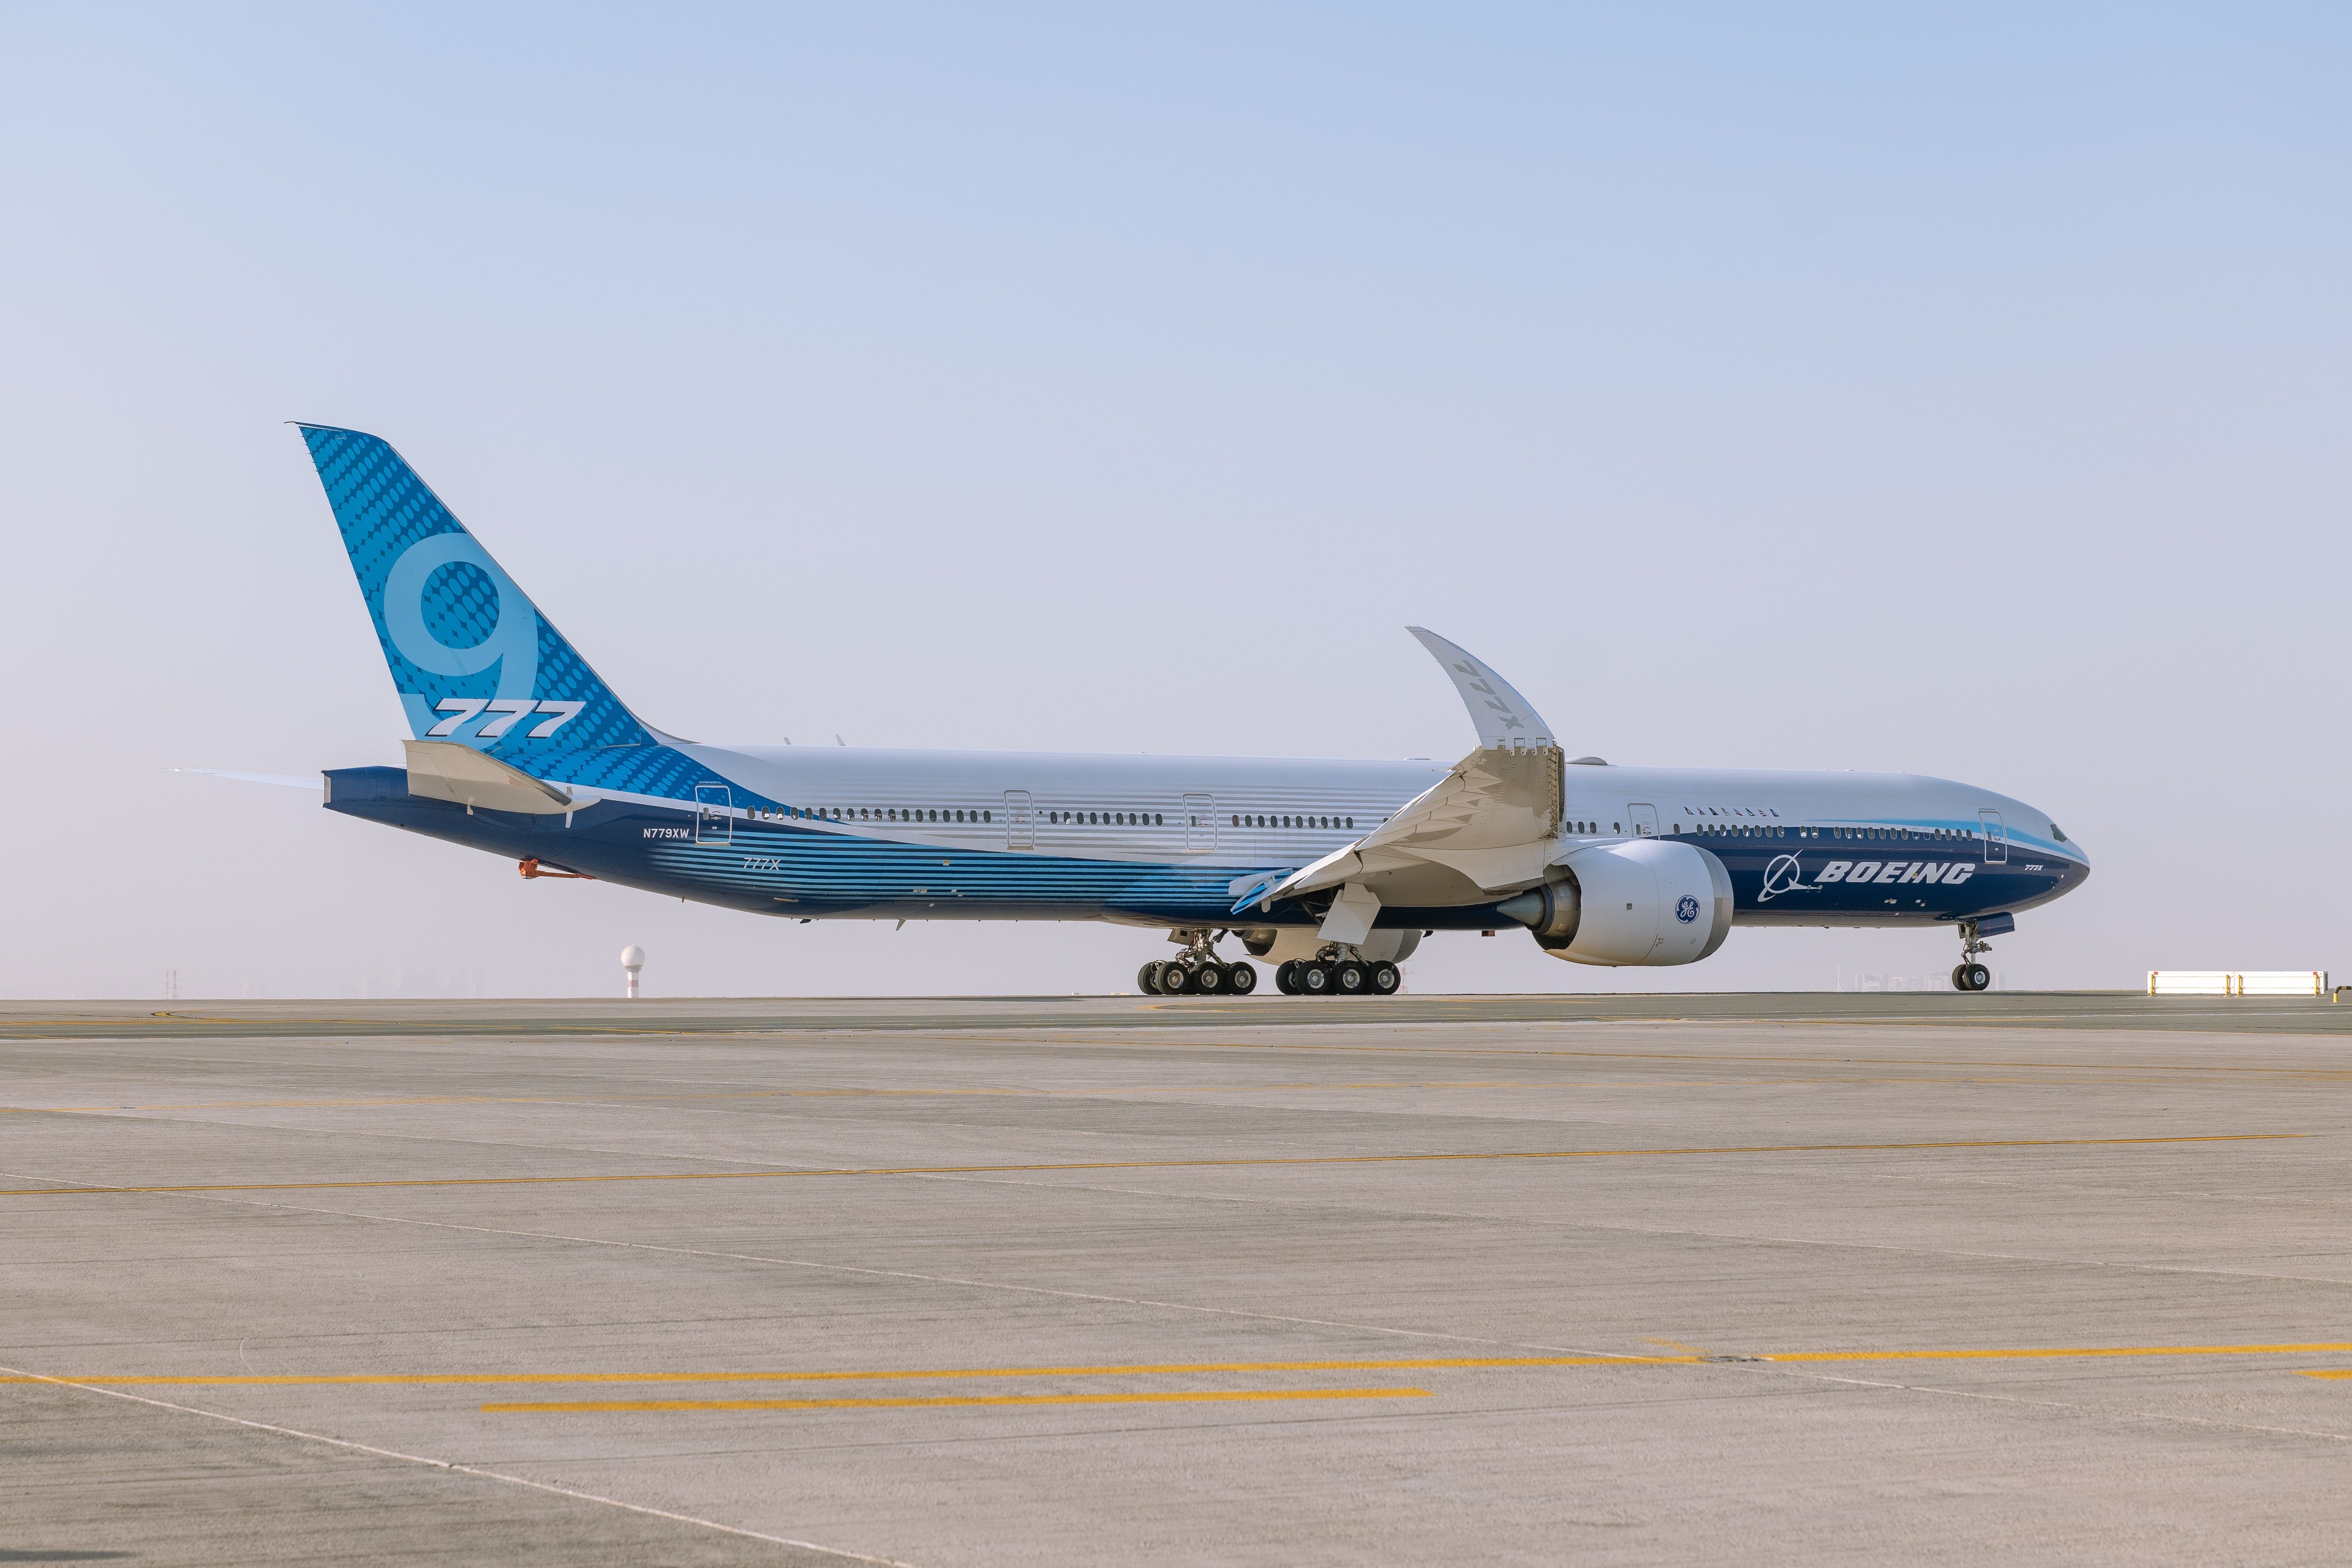 A Boeing 777-9 taxiing at an airport.